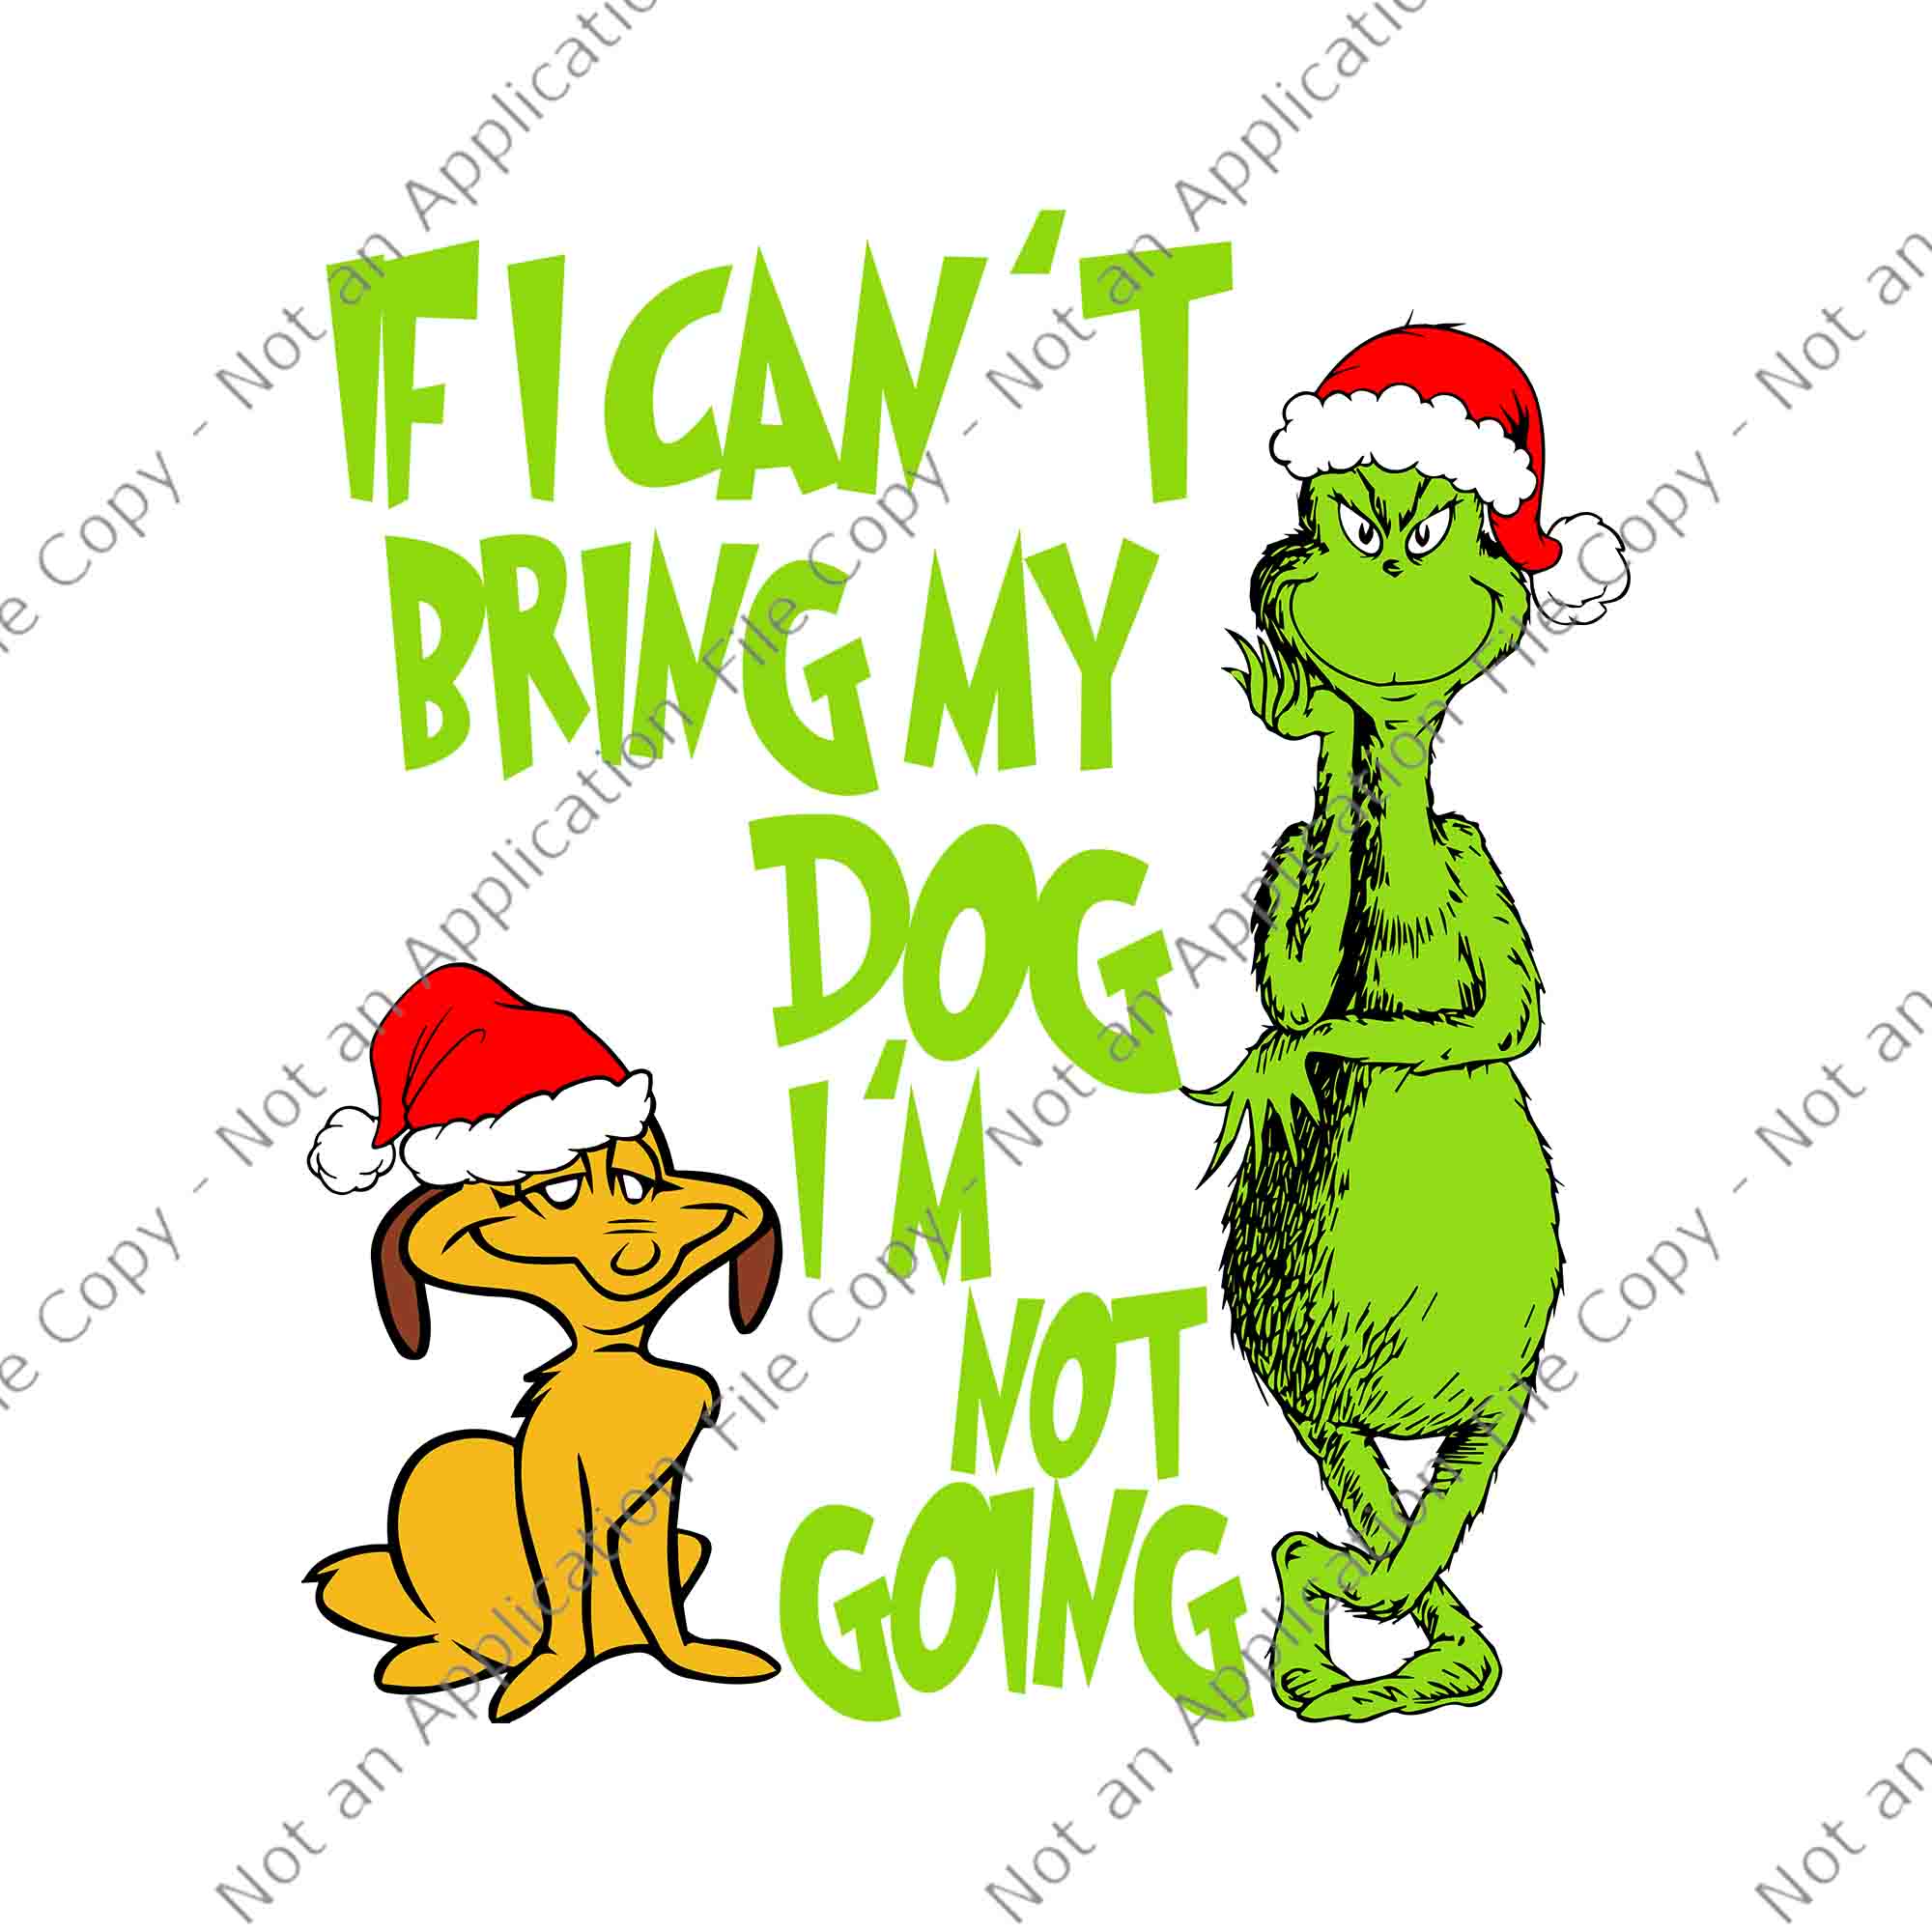 Thats It Im Not Going Grinch Max SVG